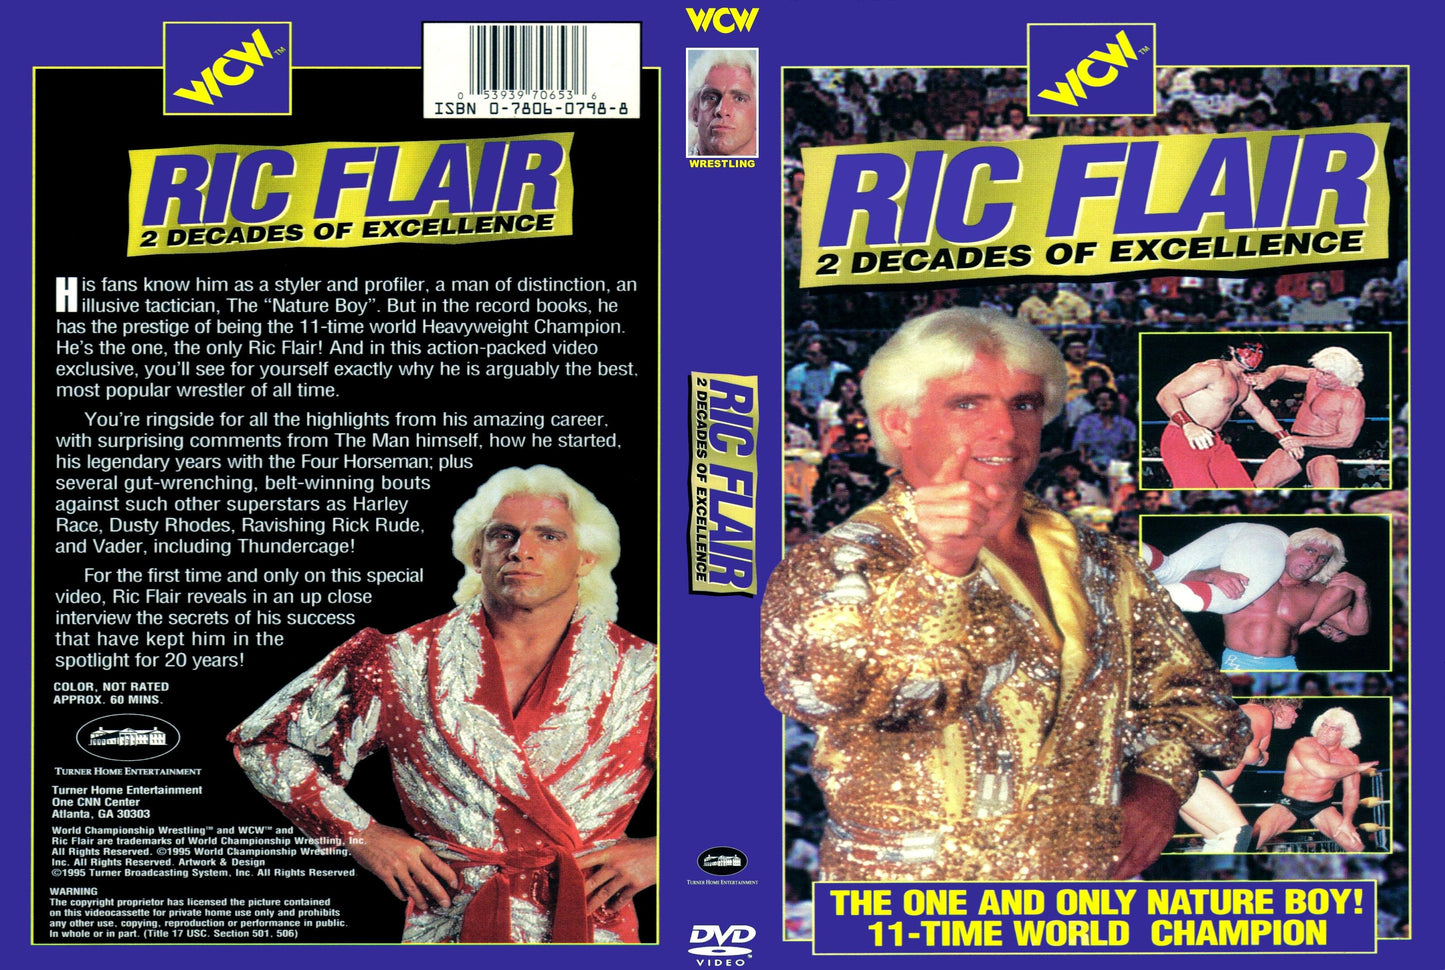 ric flair 2 decades of excellence